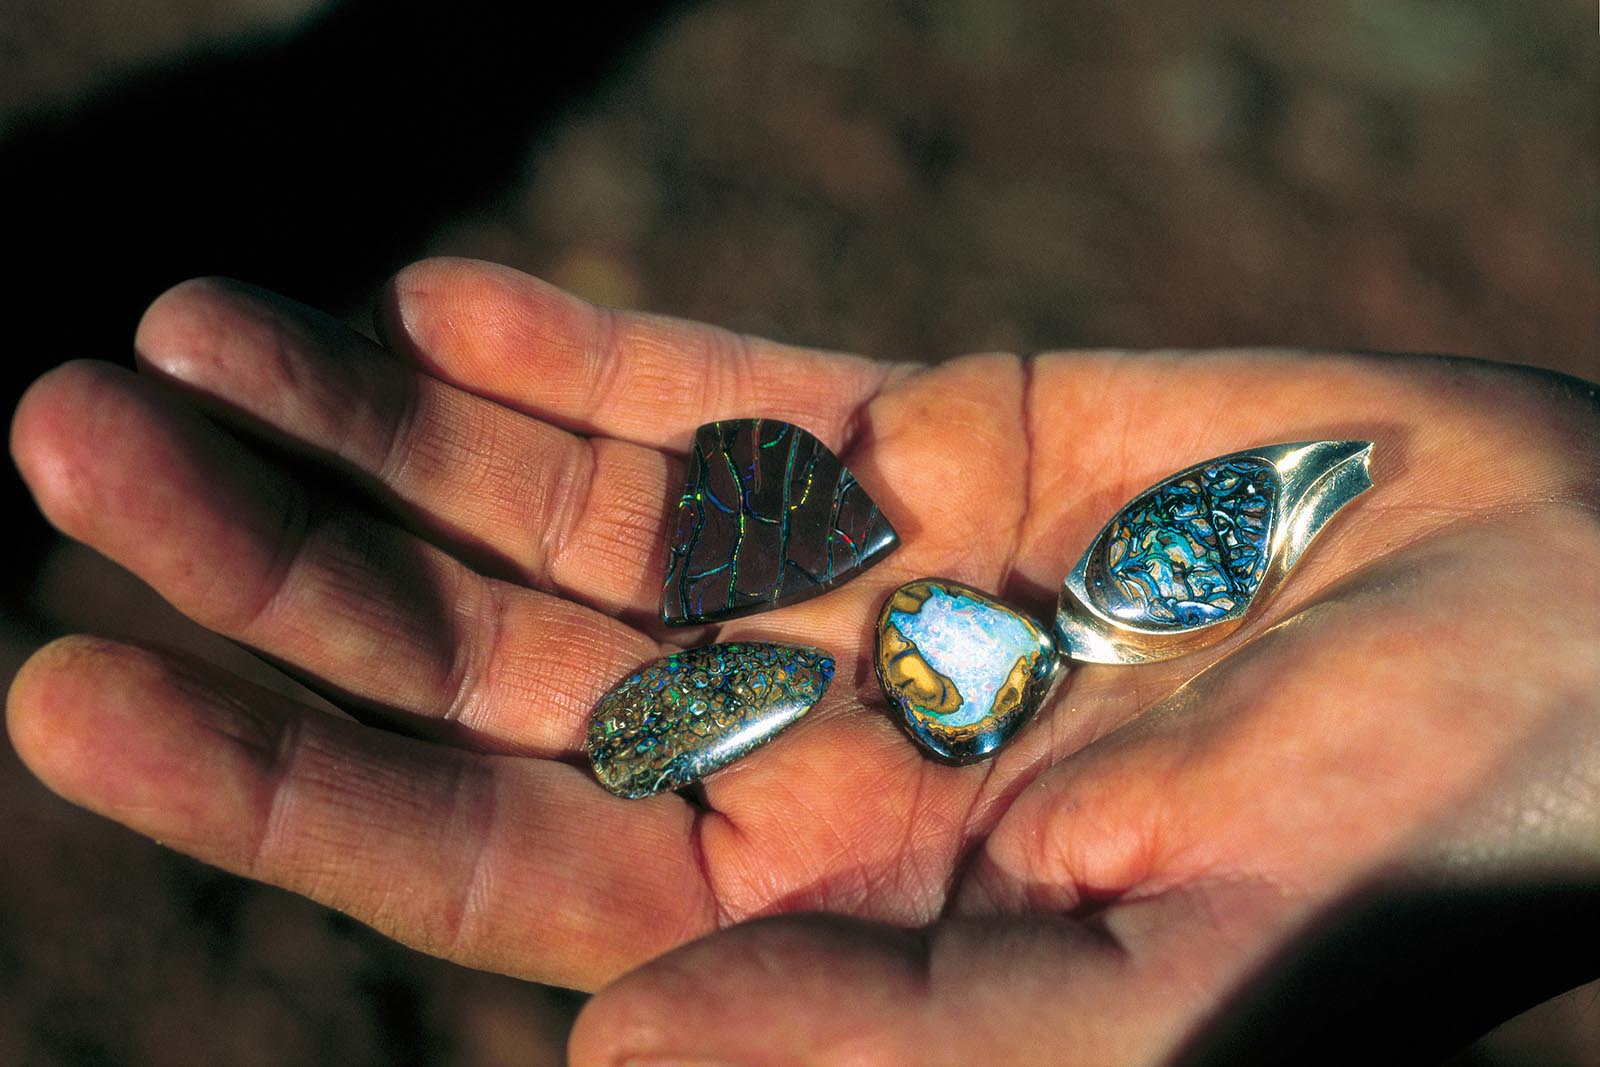 Fossick for opals in Outback Queensland | Epic outback guide